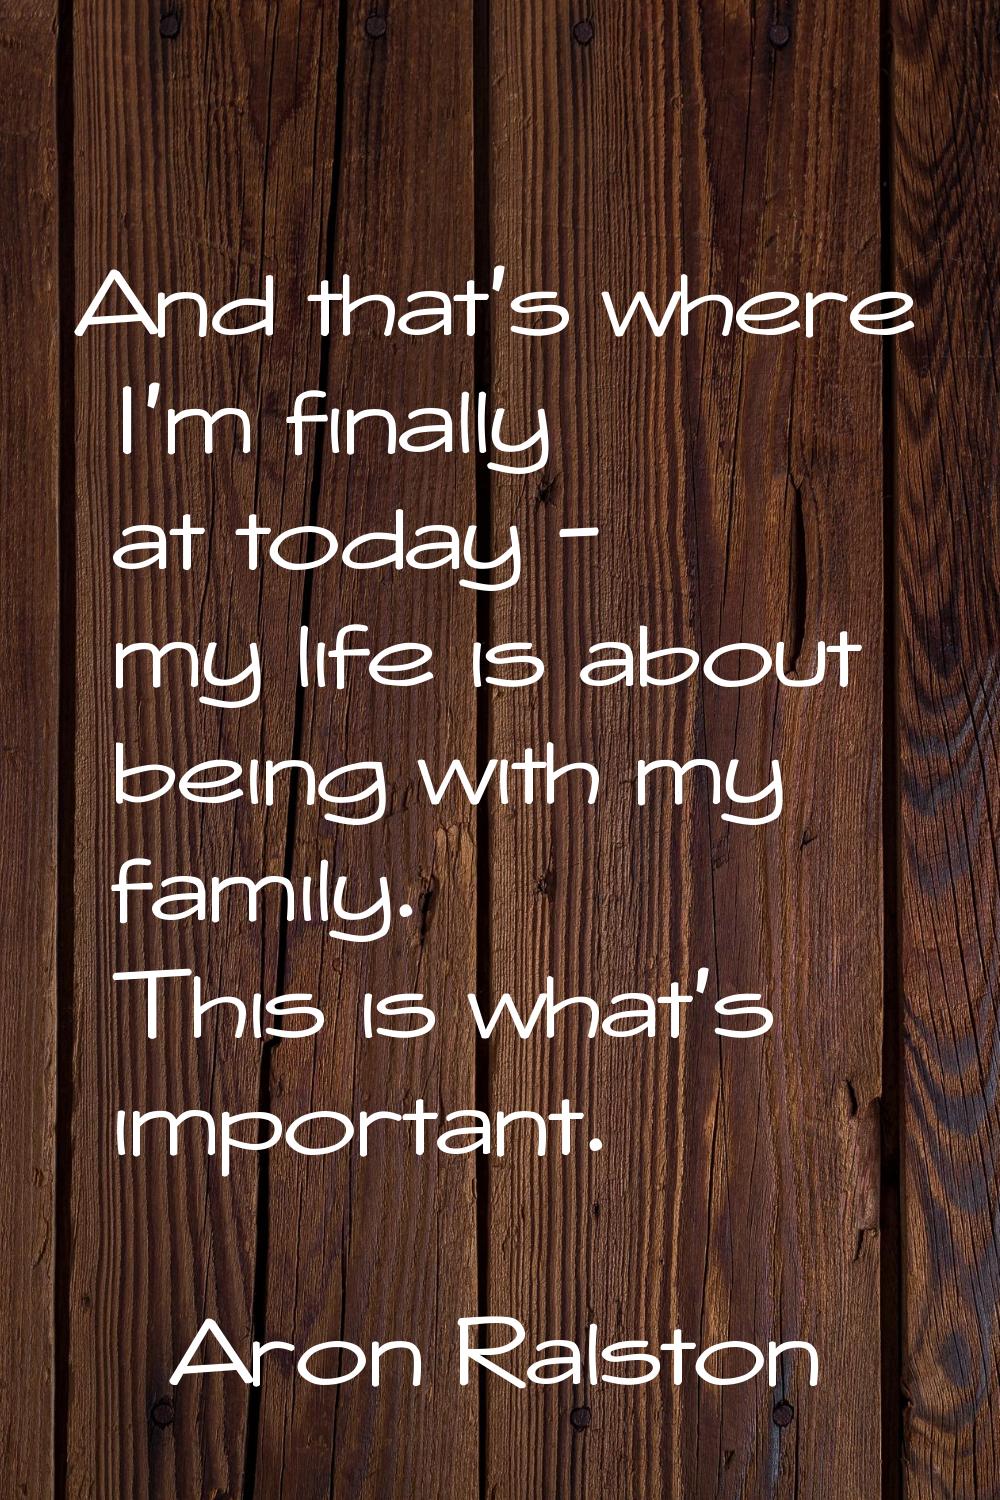 And that's where I'm finally at today - my life is about being with my family. This is what's impor